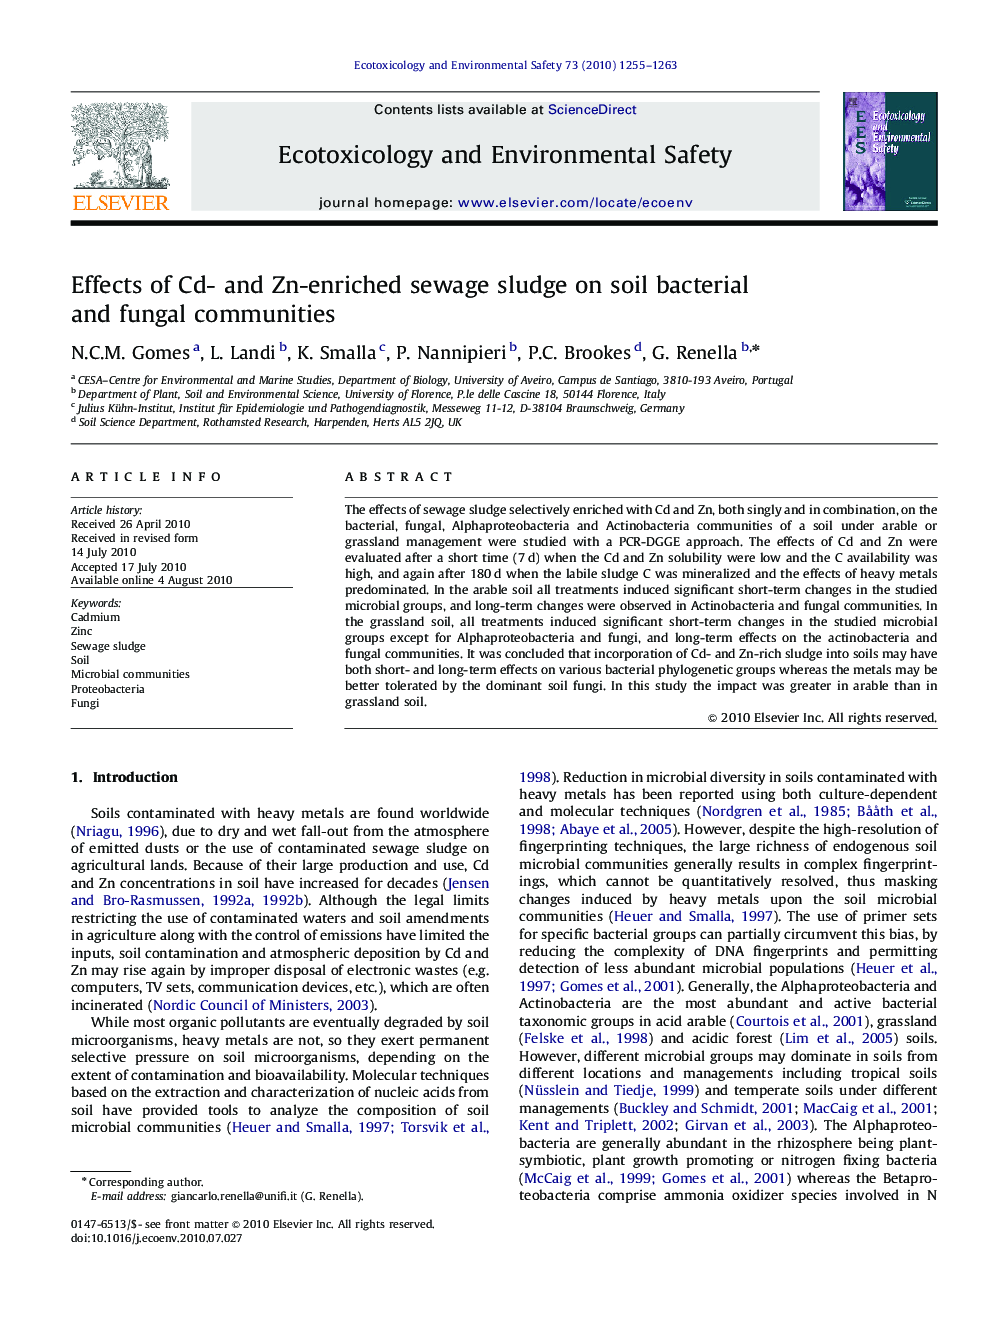 Effects of Cd- and Zn-enriched sewage sludge on soil bacterial and fungal communities